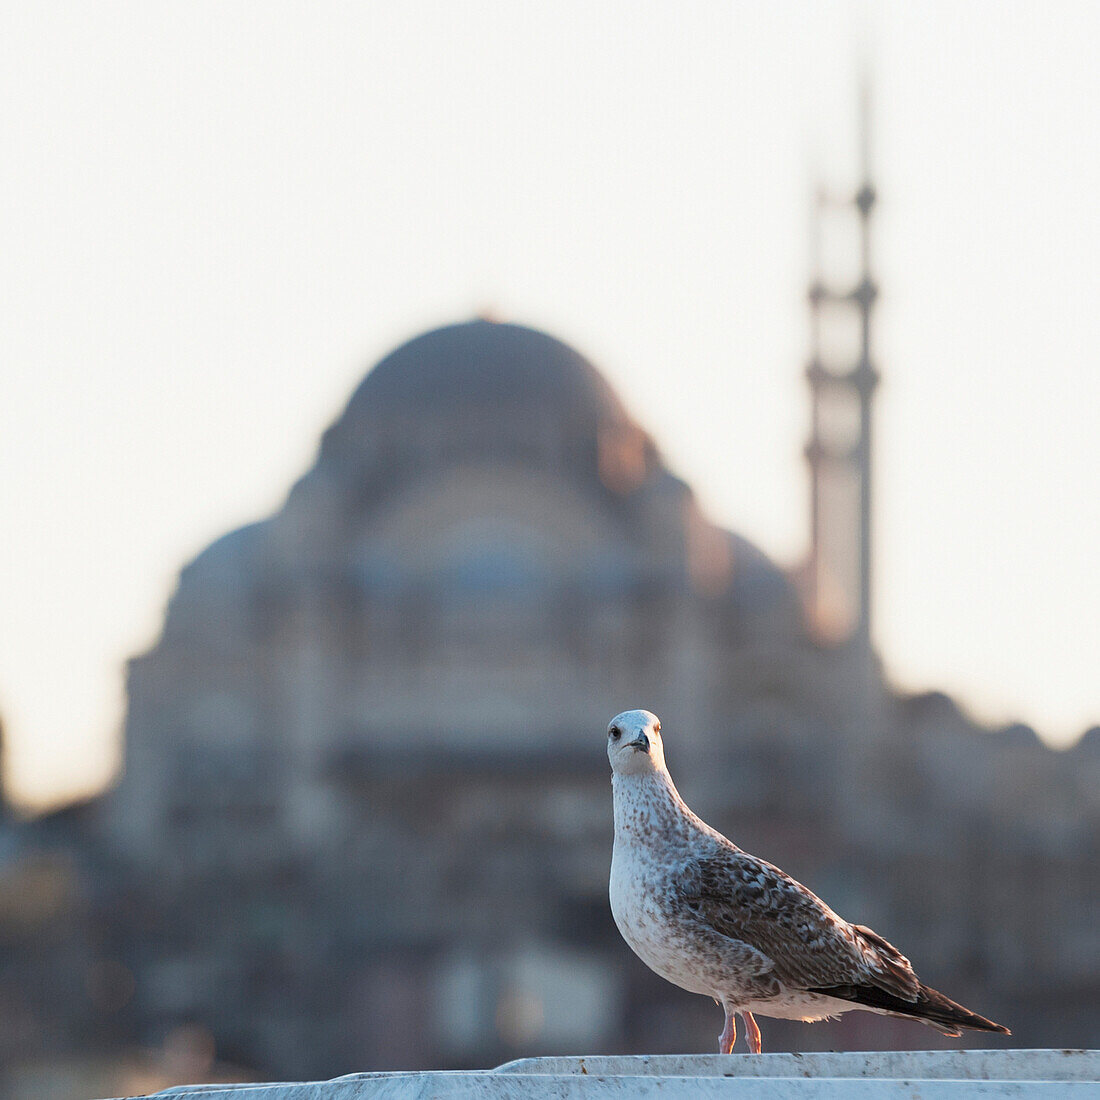 'A watchful bird with the suleymaniye mosque in the background;Istanbul turkey'